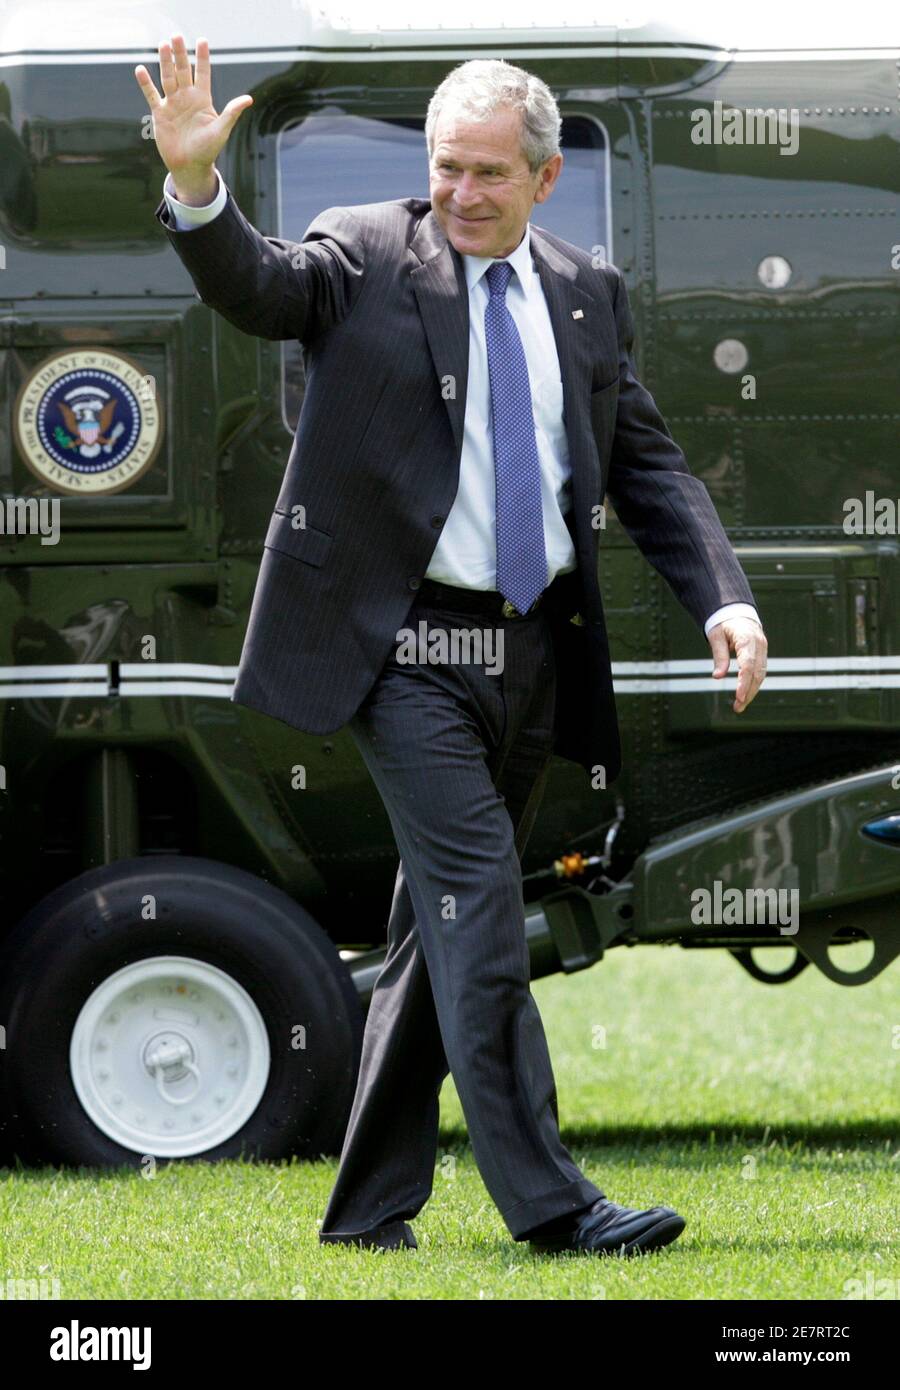 U.S. President George W. Bush waves as he walks on the South Lawn of the White House upon his return to Washington July 4, 2008. Bush attended Monticello?s annual Independence Day celebration and naturalization ceremony in Charlottesville, Virginia. REUTERS/Yuri Gripas (UNITED STATES) Stock Photo